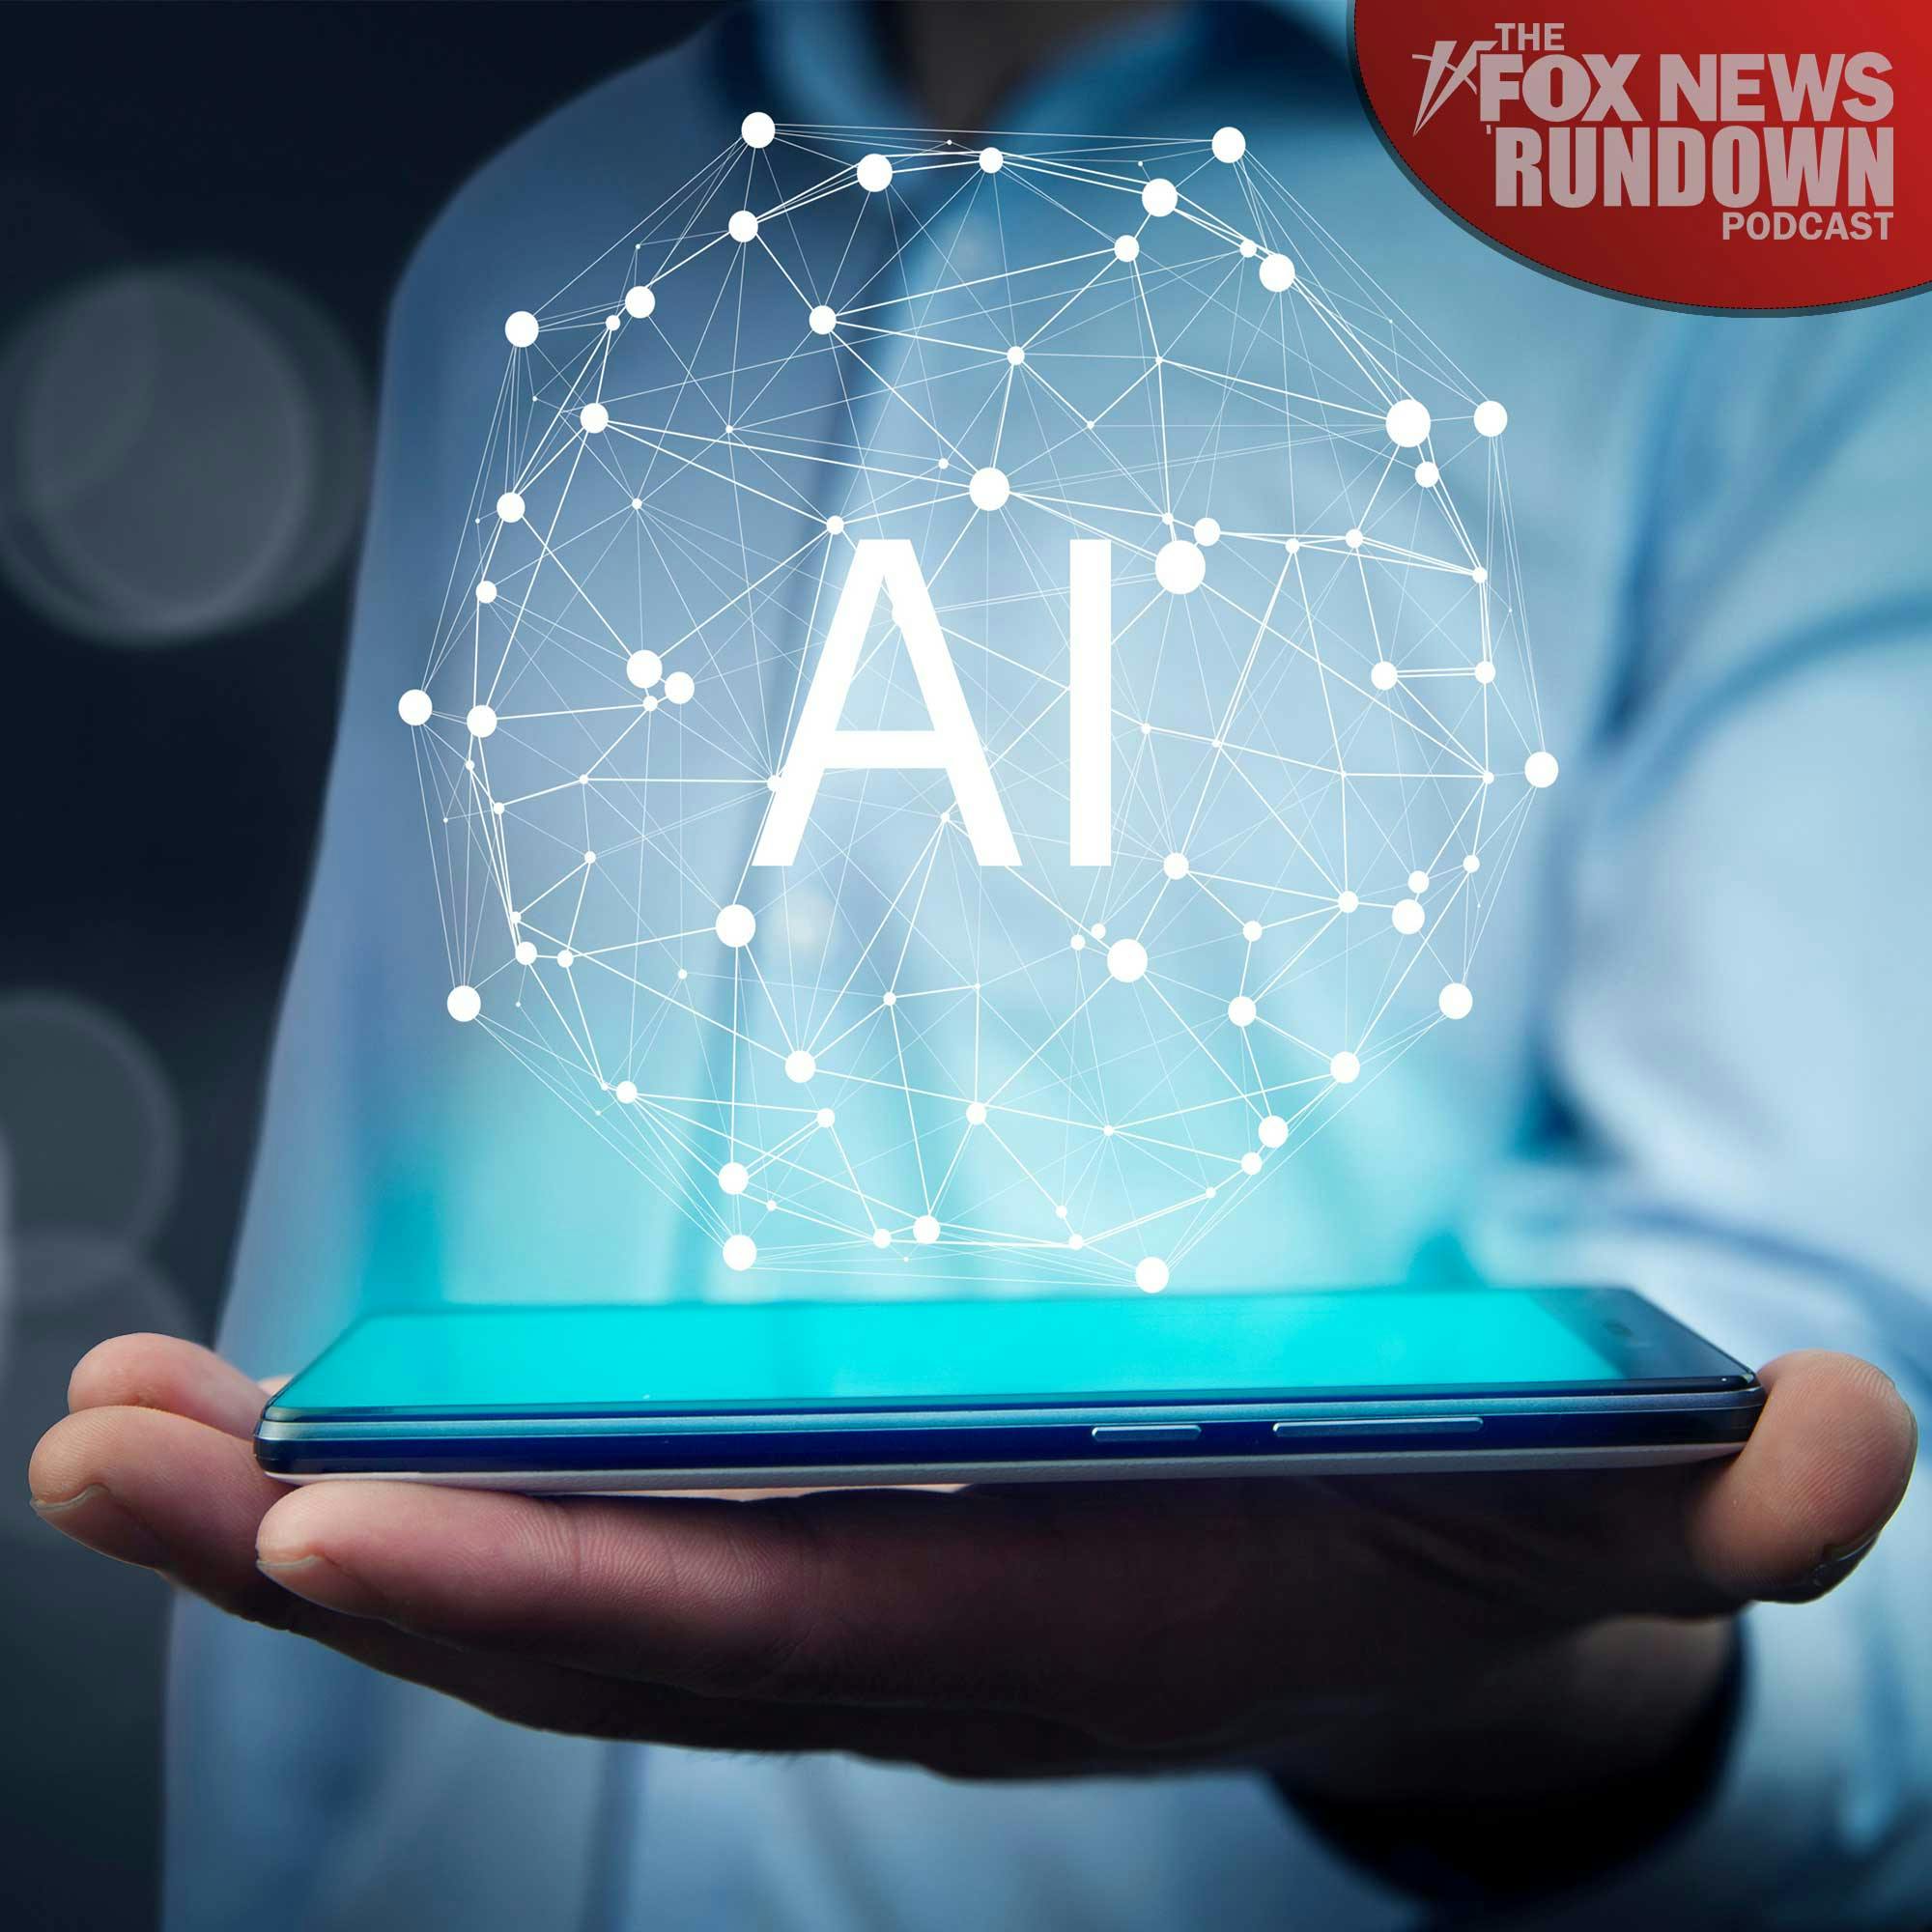 Extra: Artificial Intelligence Promises to Change the Course of Humanity